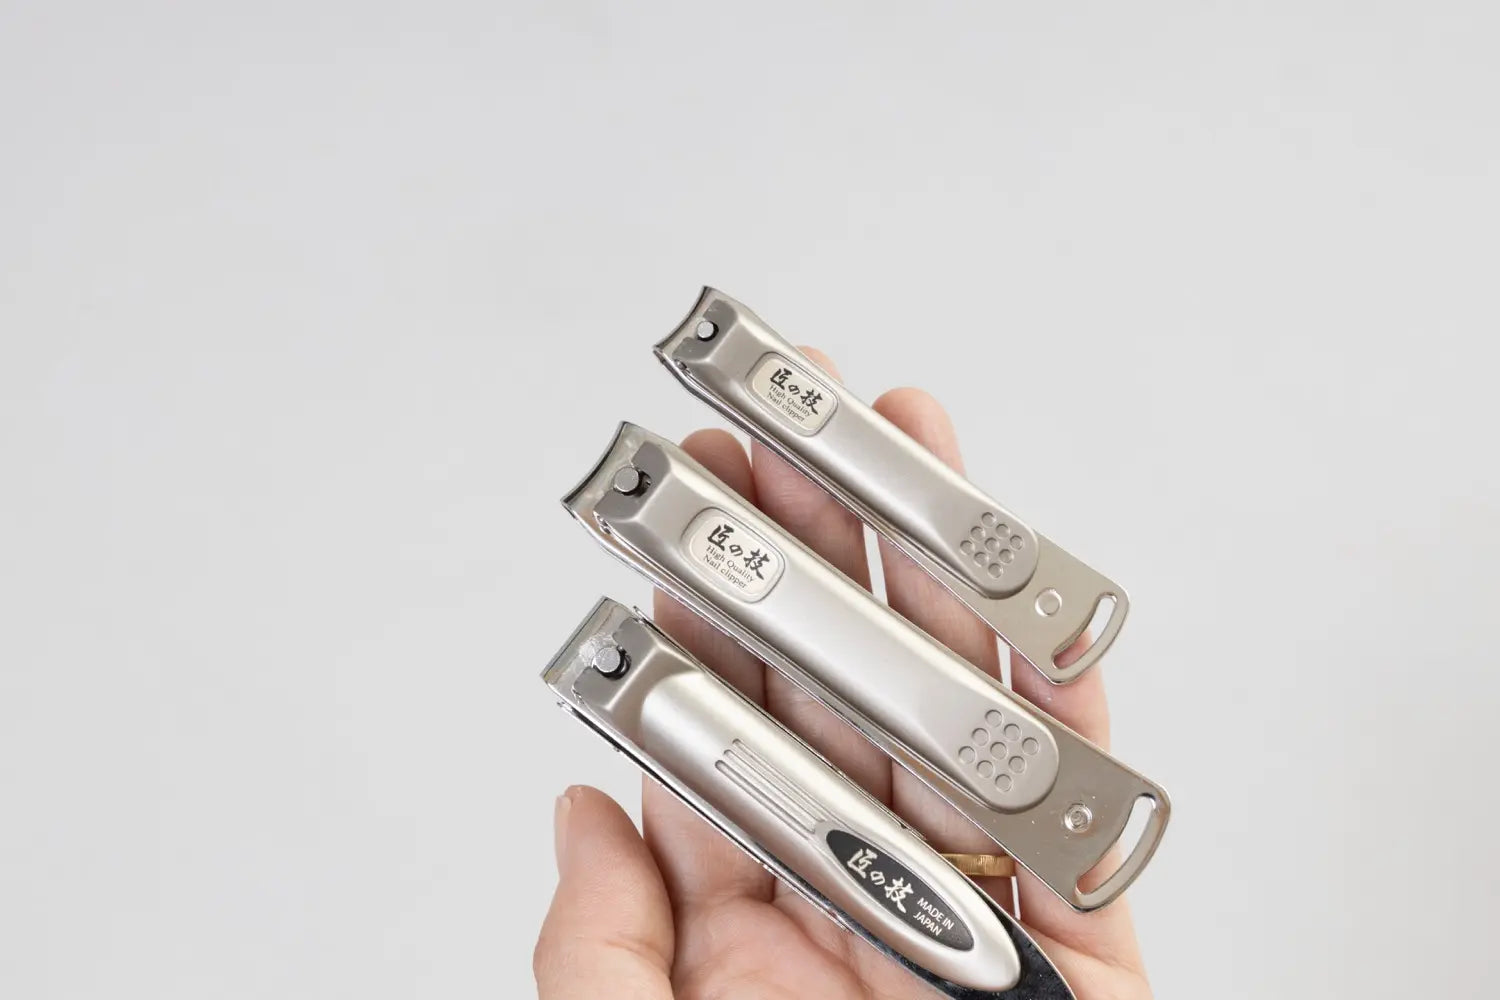 Three nail clippers being held